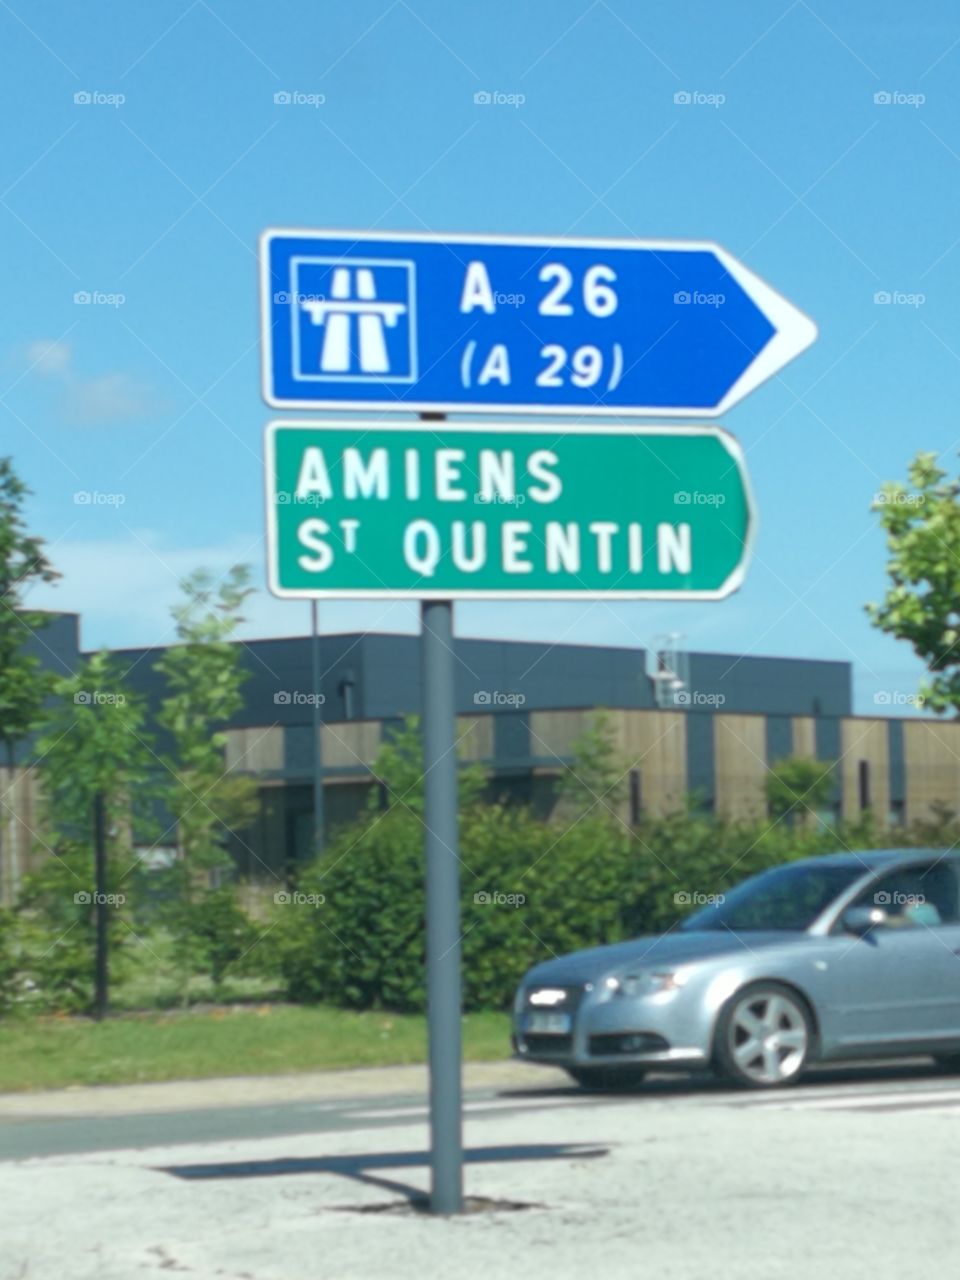 the directional signs to Amiens and Saint-Quentin, the 2 biggest cities of my region in France